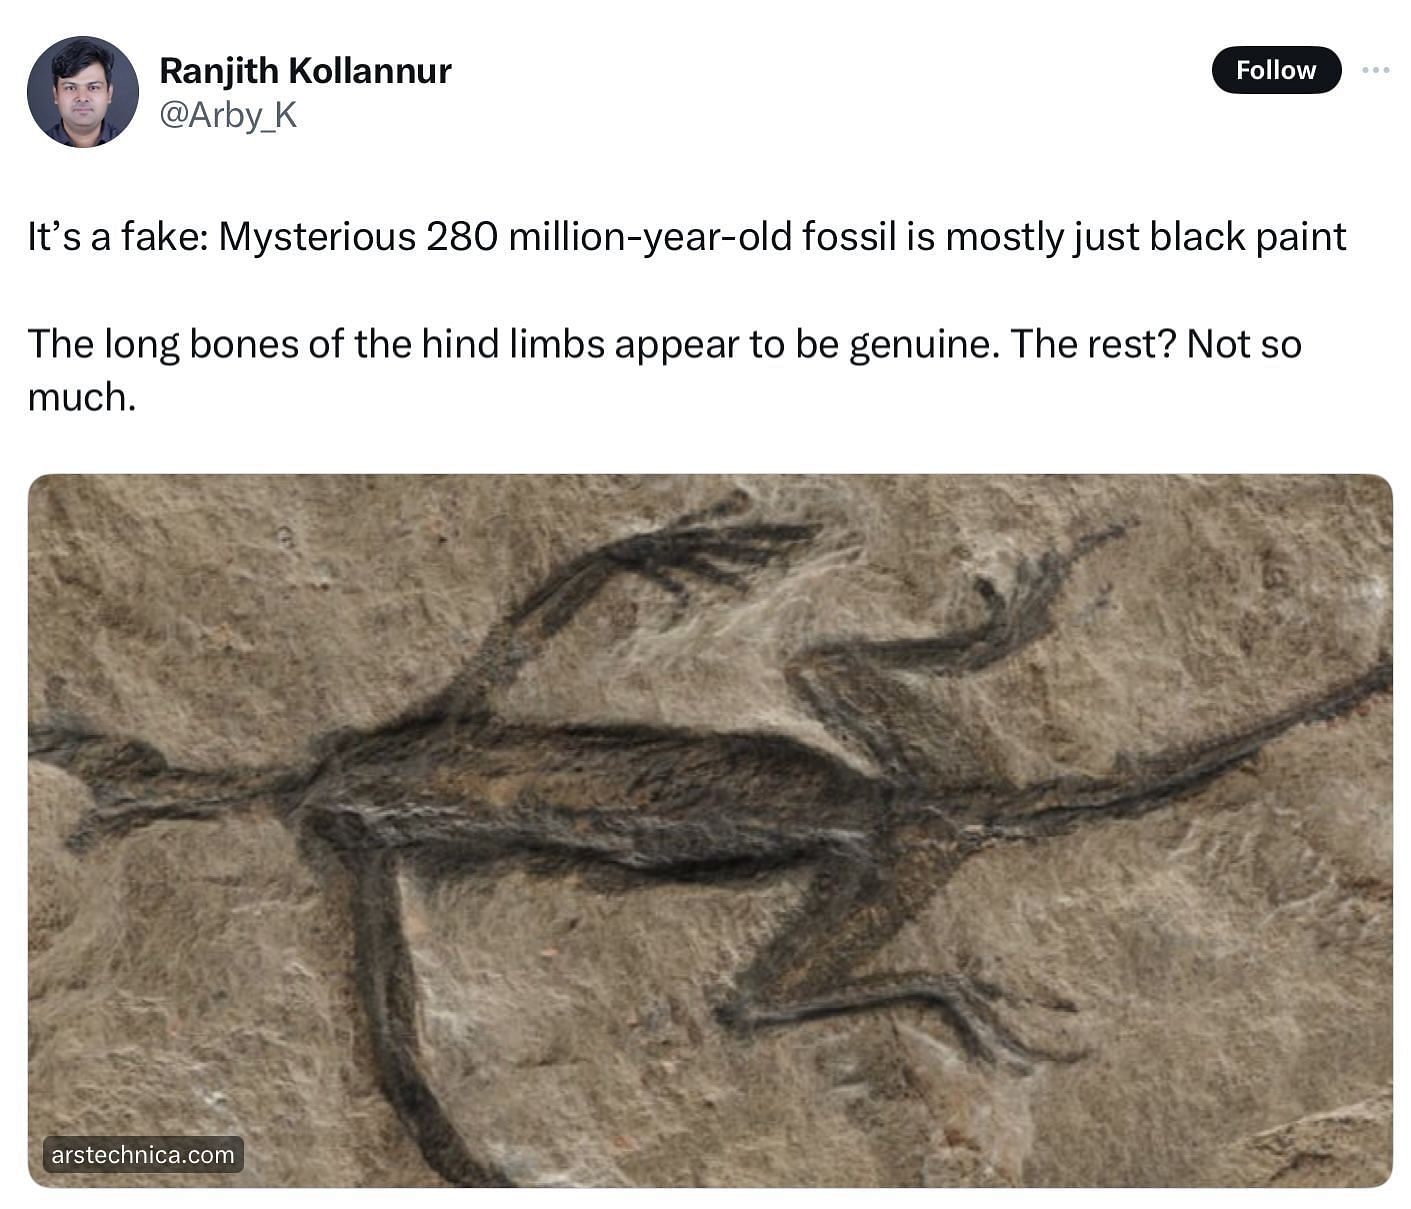 New study shows a 280 million-year-old reptile specimen is a fake (Image via @Arby_K/X)